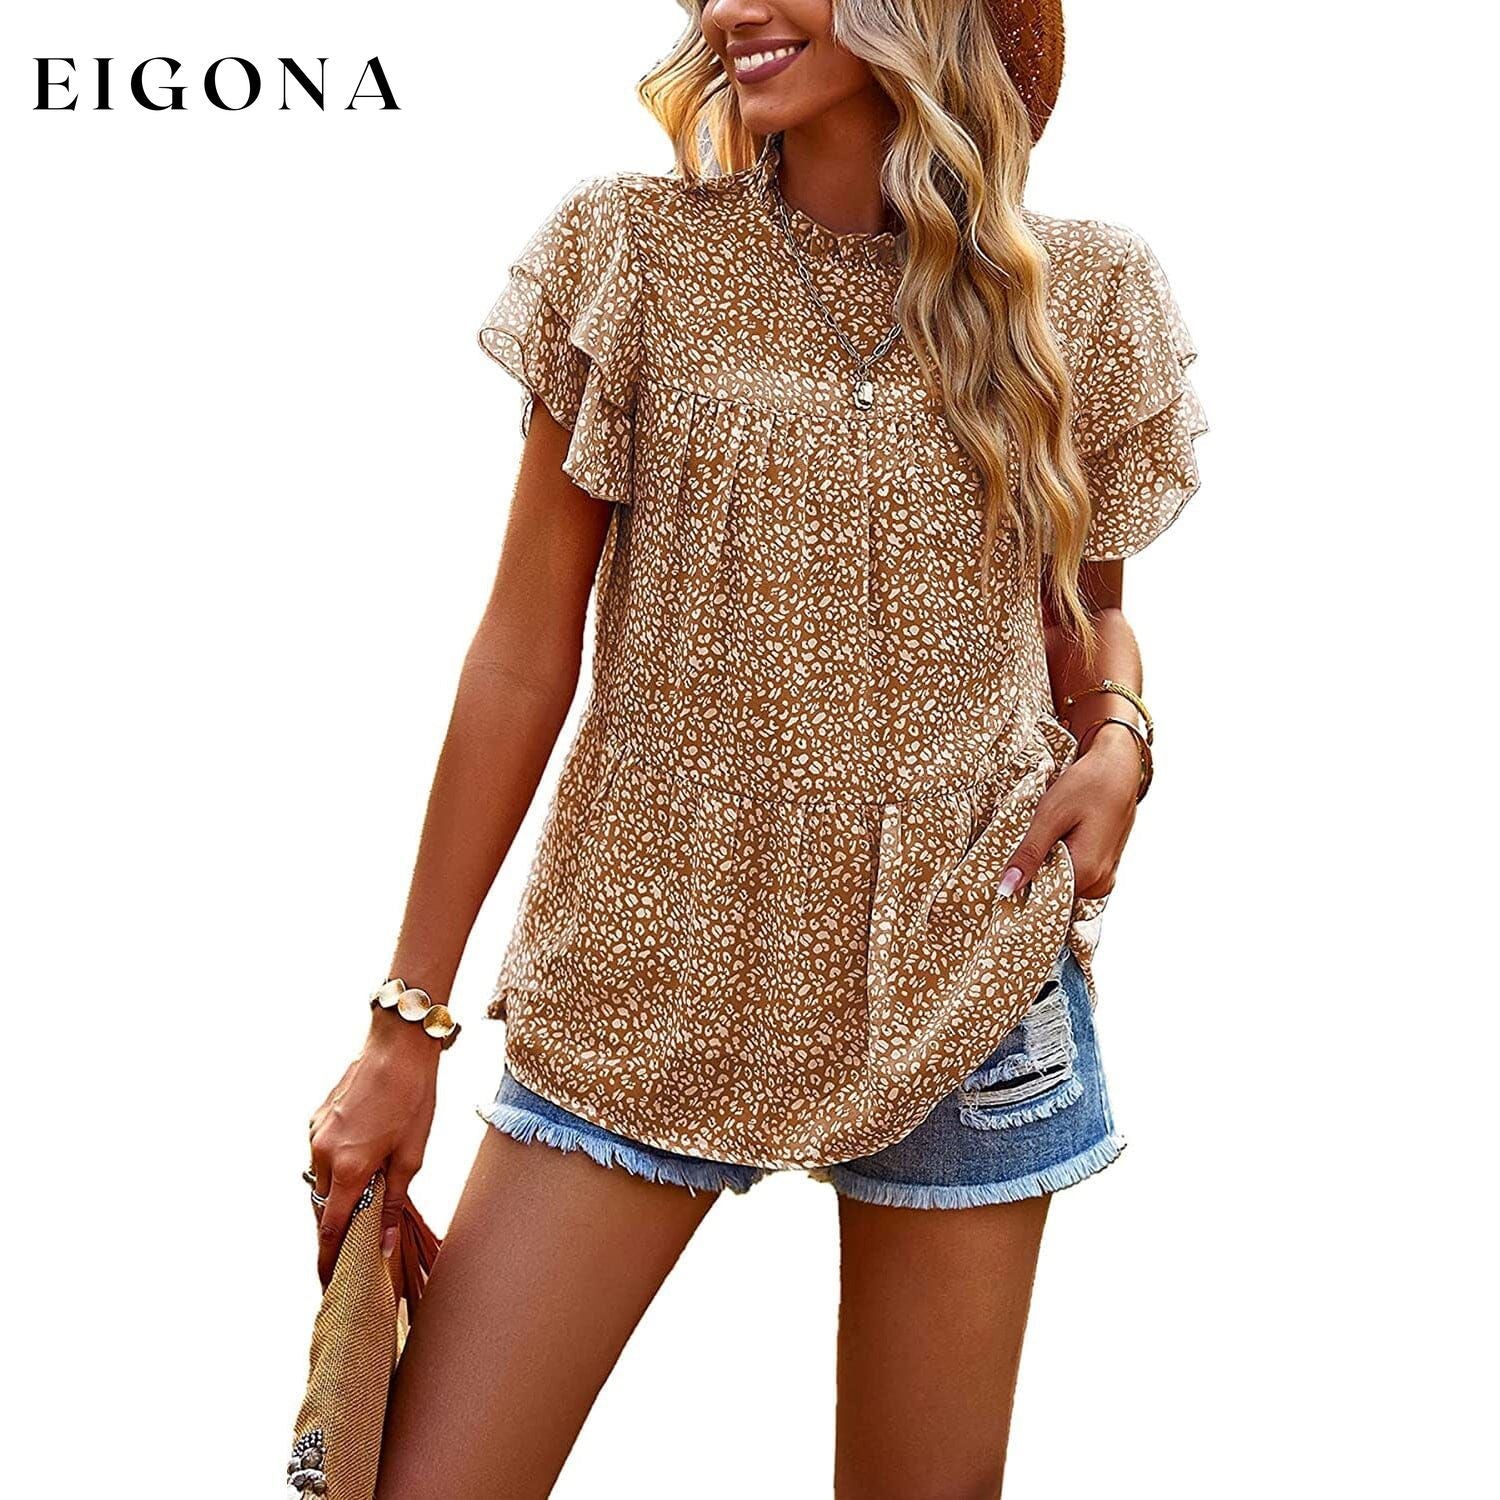 Women's Casual Summer Tops Ruffle Short Sleeve Mock Neck Fashion Floral Chiffon Blouse Shirts Coffee __stock:200 clothes refund_fee:1200 tops